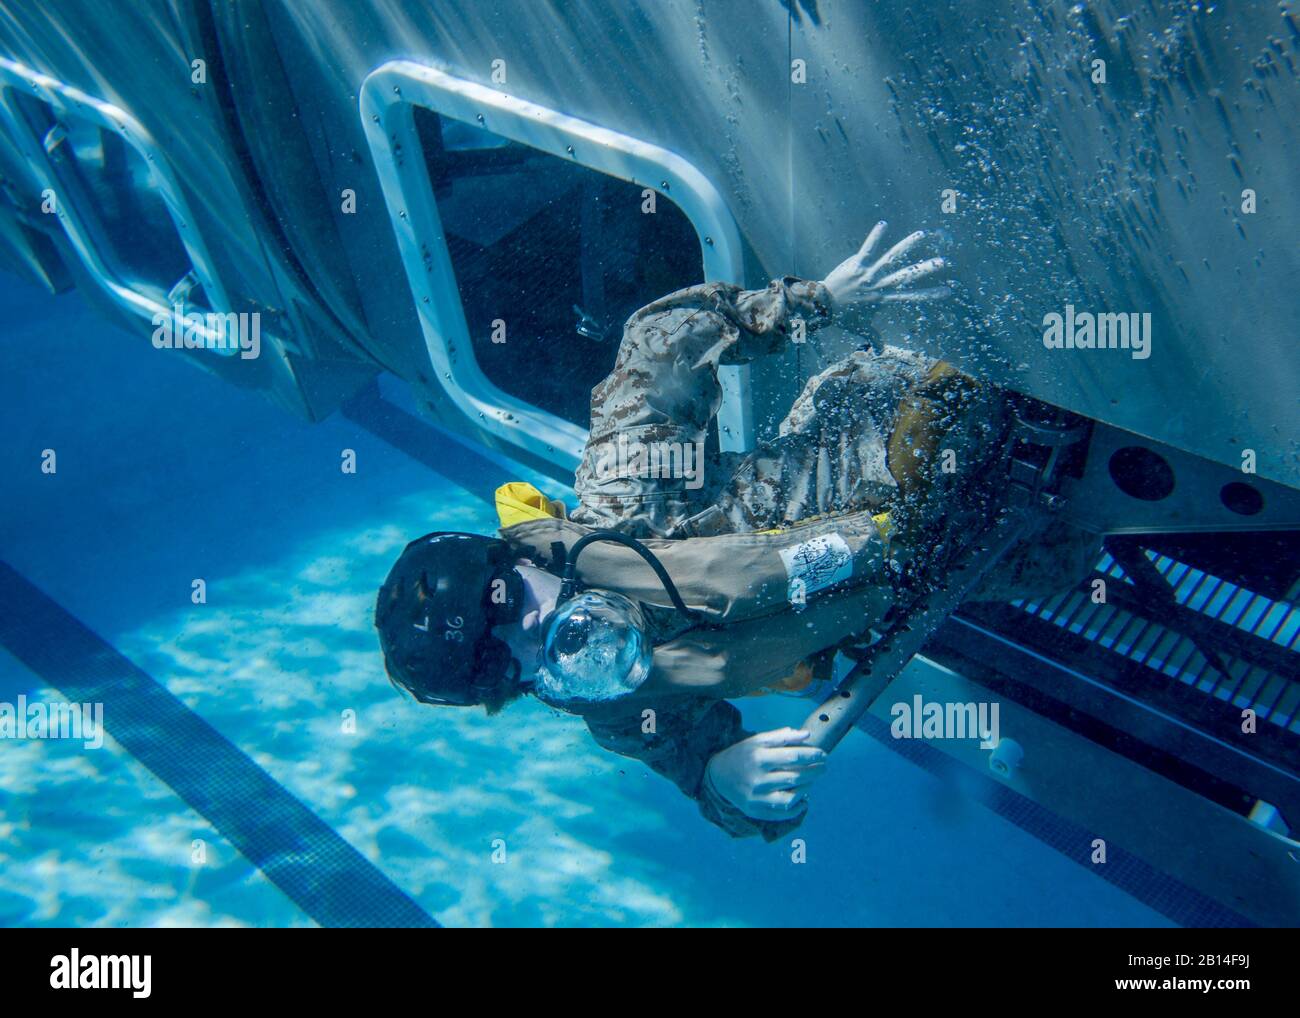 U.S. Marines with the 13th Marine Expeditionary Unit, I Marine Expeditionary Force, conducted underwater egress survival training on Camp Pendleton, Calif., Feb 9, 2018. The Modular Amphibious Egress Trainer resembles a helicopter and is used to train Marines in escape procedures in the event of a crash in water.  (U.S. Marine Corps photo by Lance Cpl. Dylan Chagnon) Stock Photo